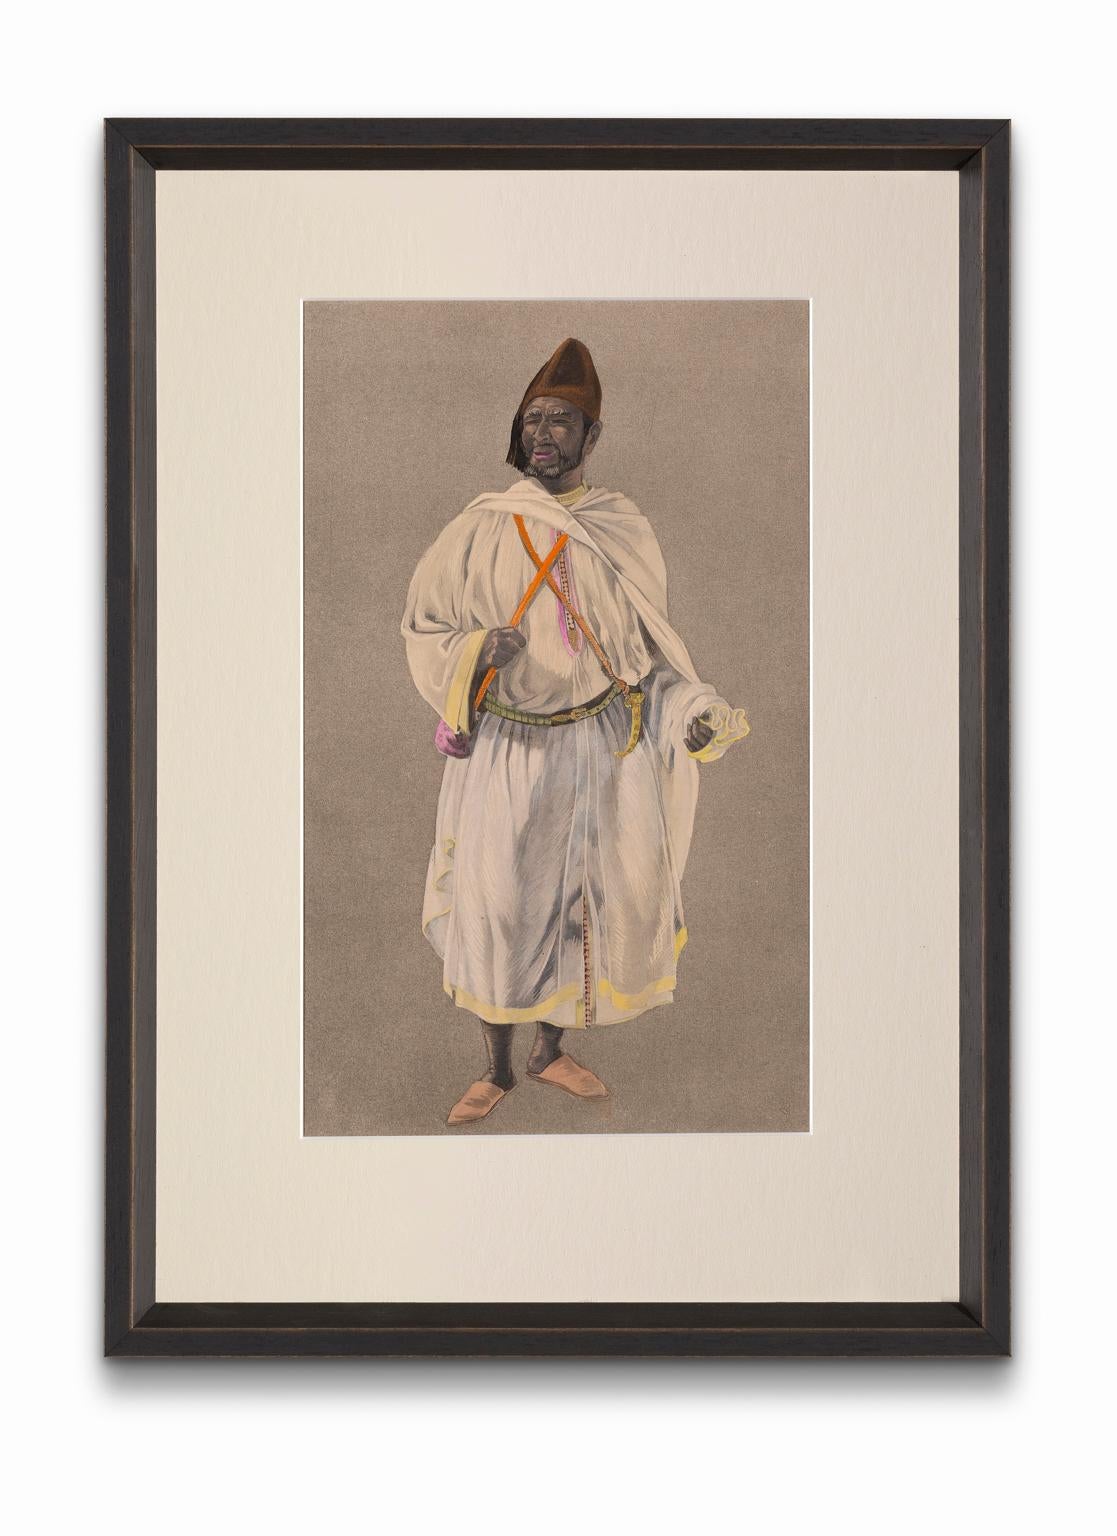 Jean Besancenot Portrait Print - "The Sultan's Moghazni" from "Costumes of Morocco", Gouache on Paper